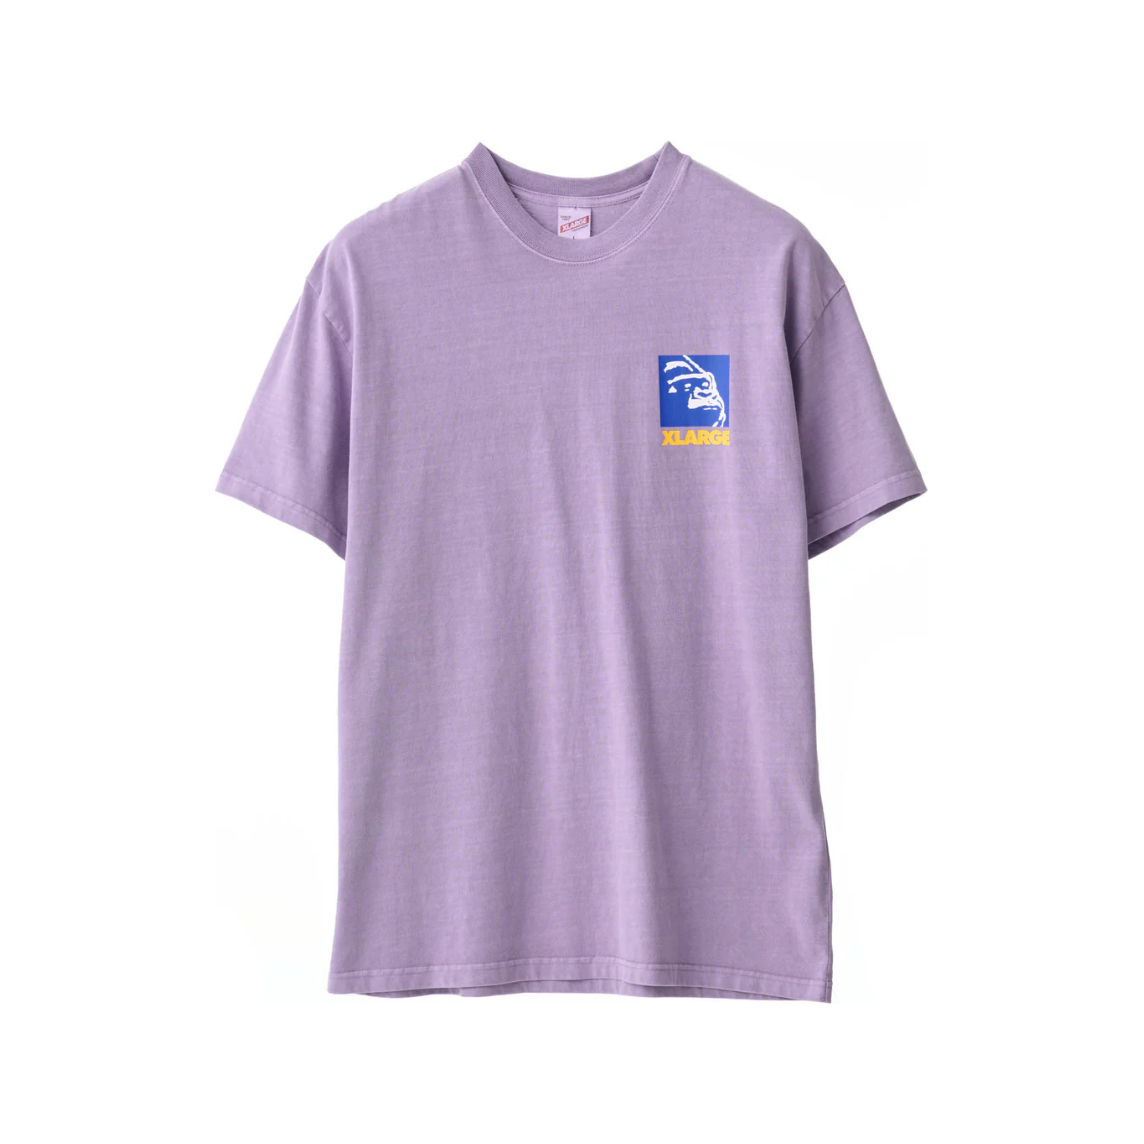 X-LARGE - Square SS Tee - Velocity 21